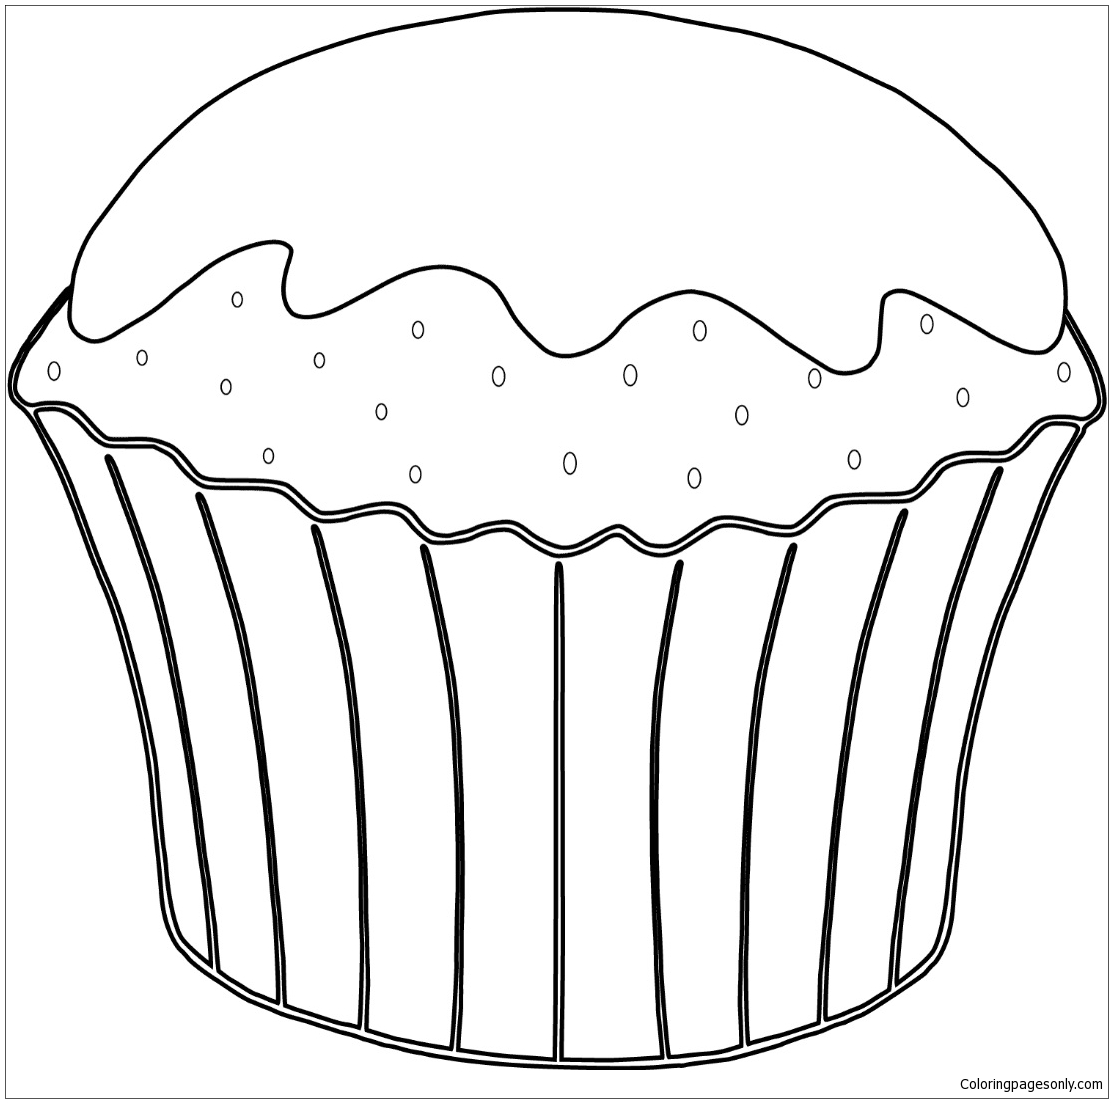 Muffin Coloring Pages